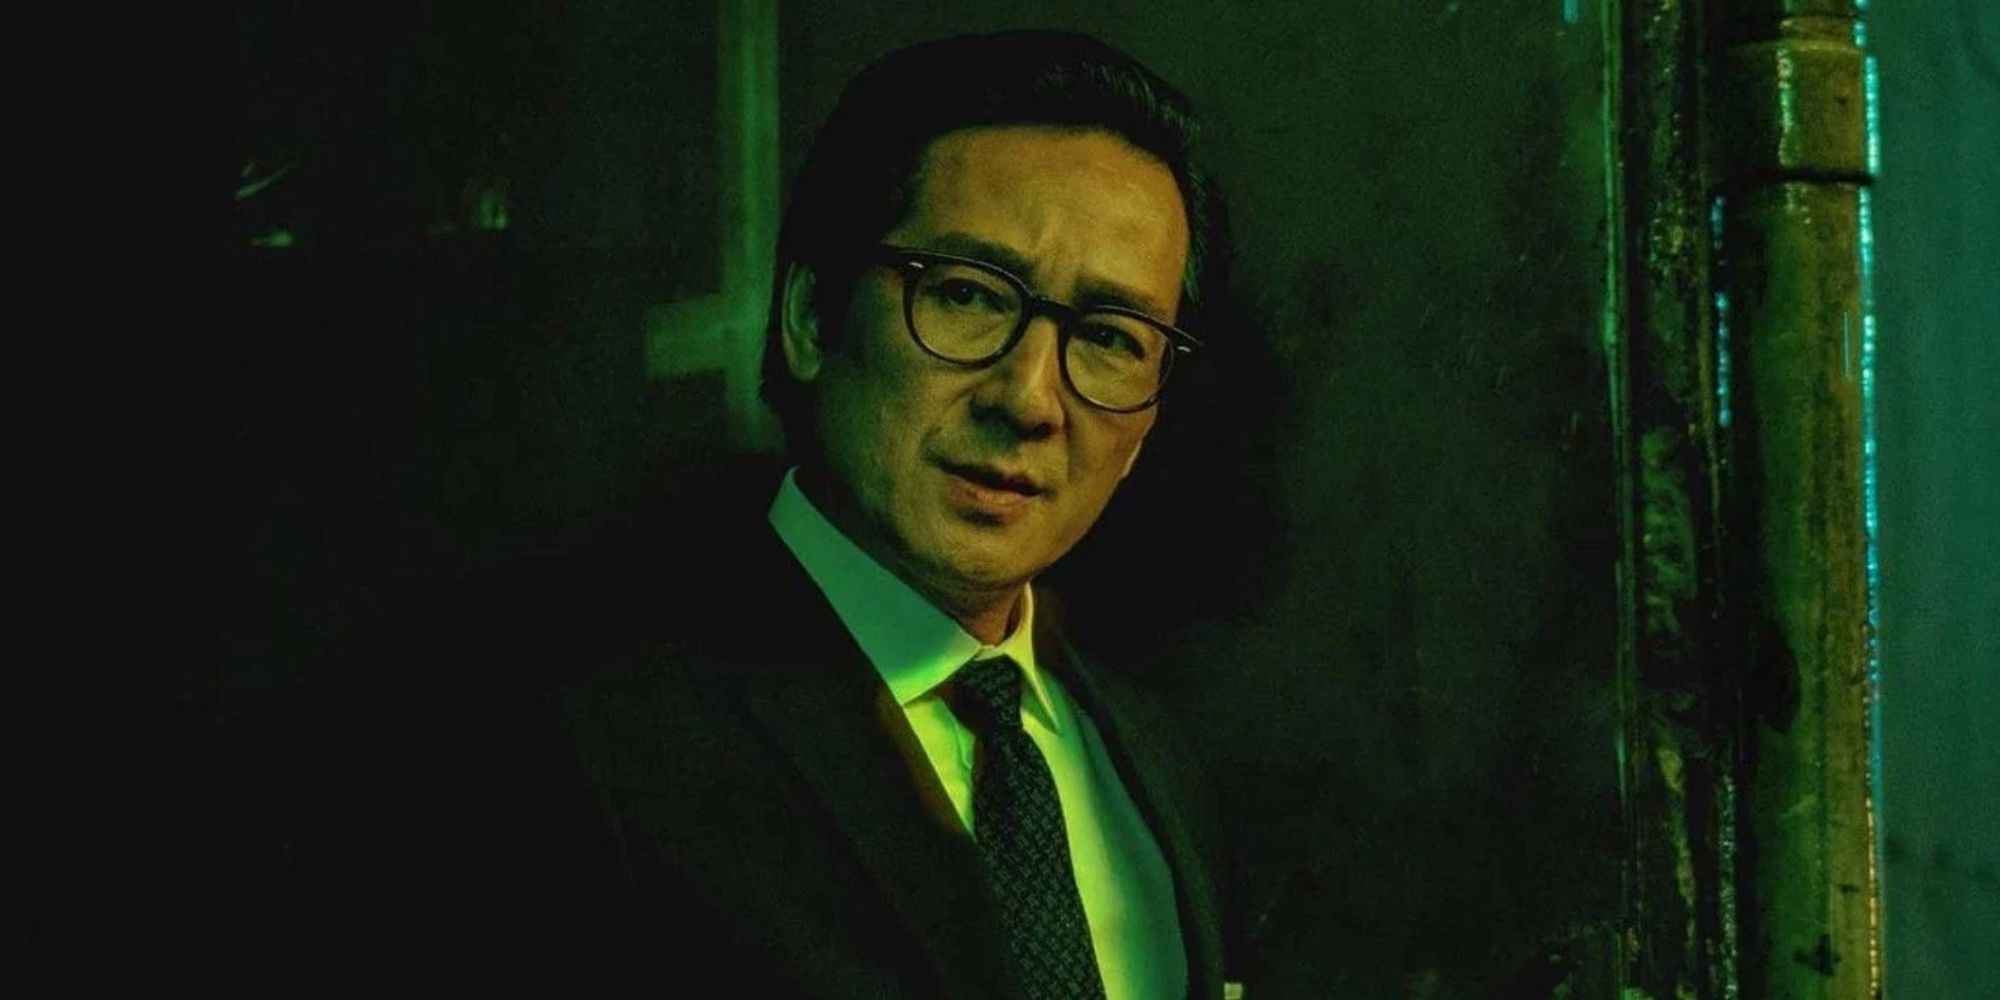 Waymond Wang (Ke Huy Quan) in a universe where he is a successful businessman instead of the owner of a laundromat